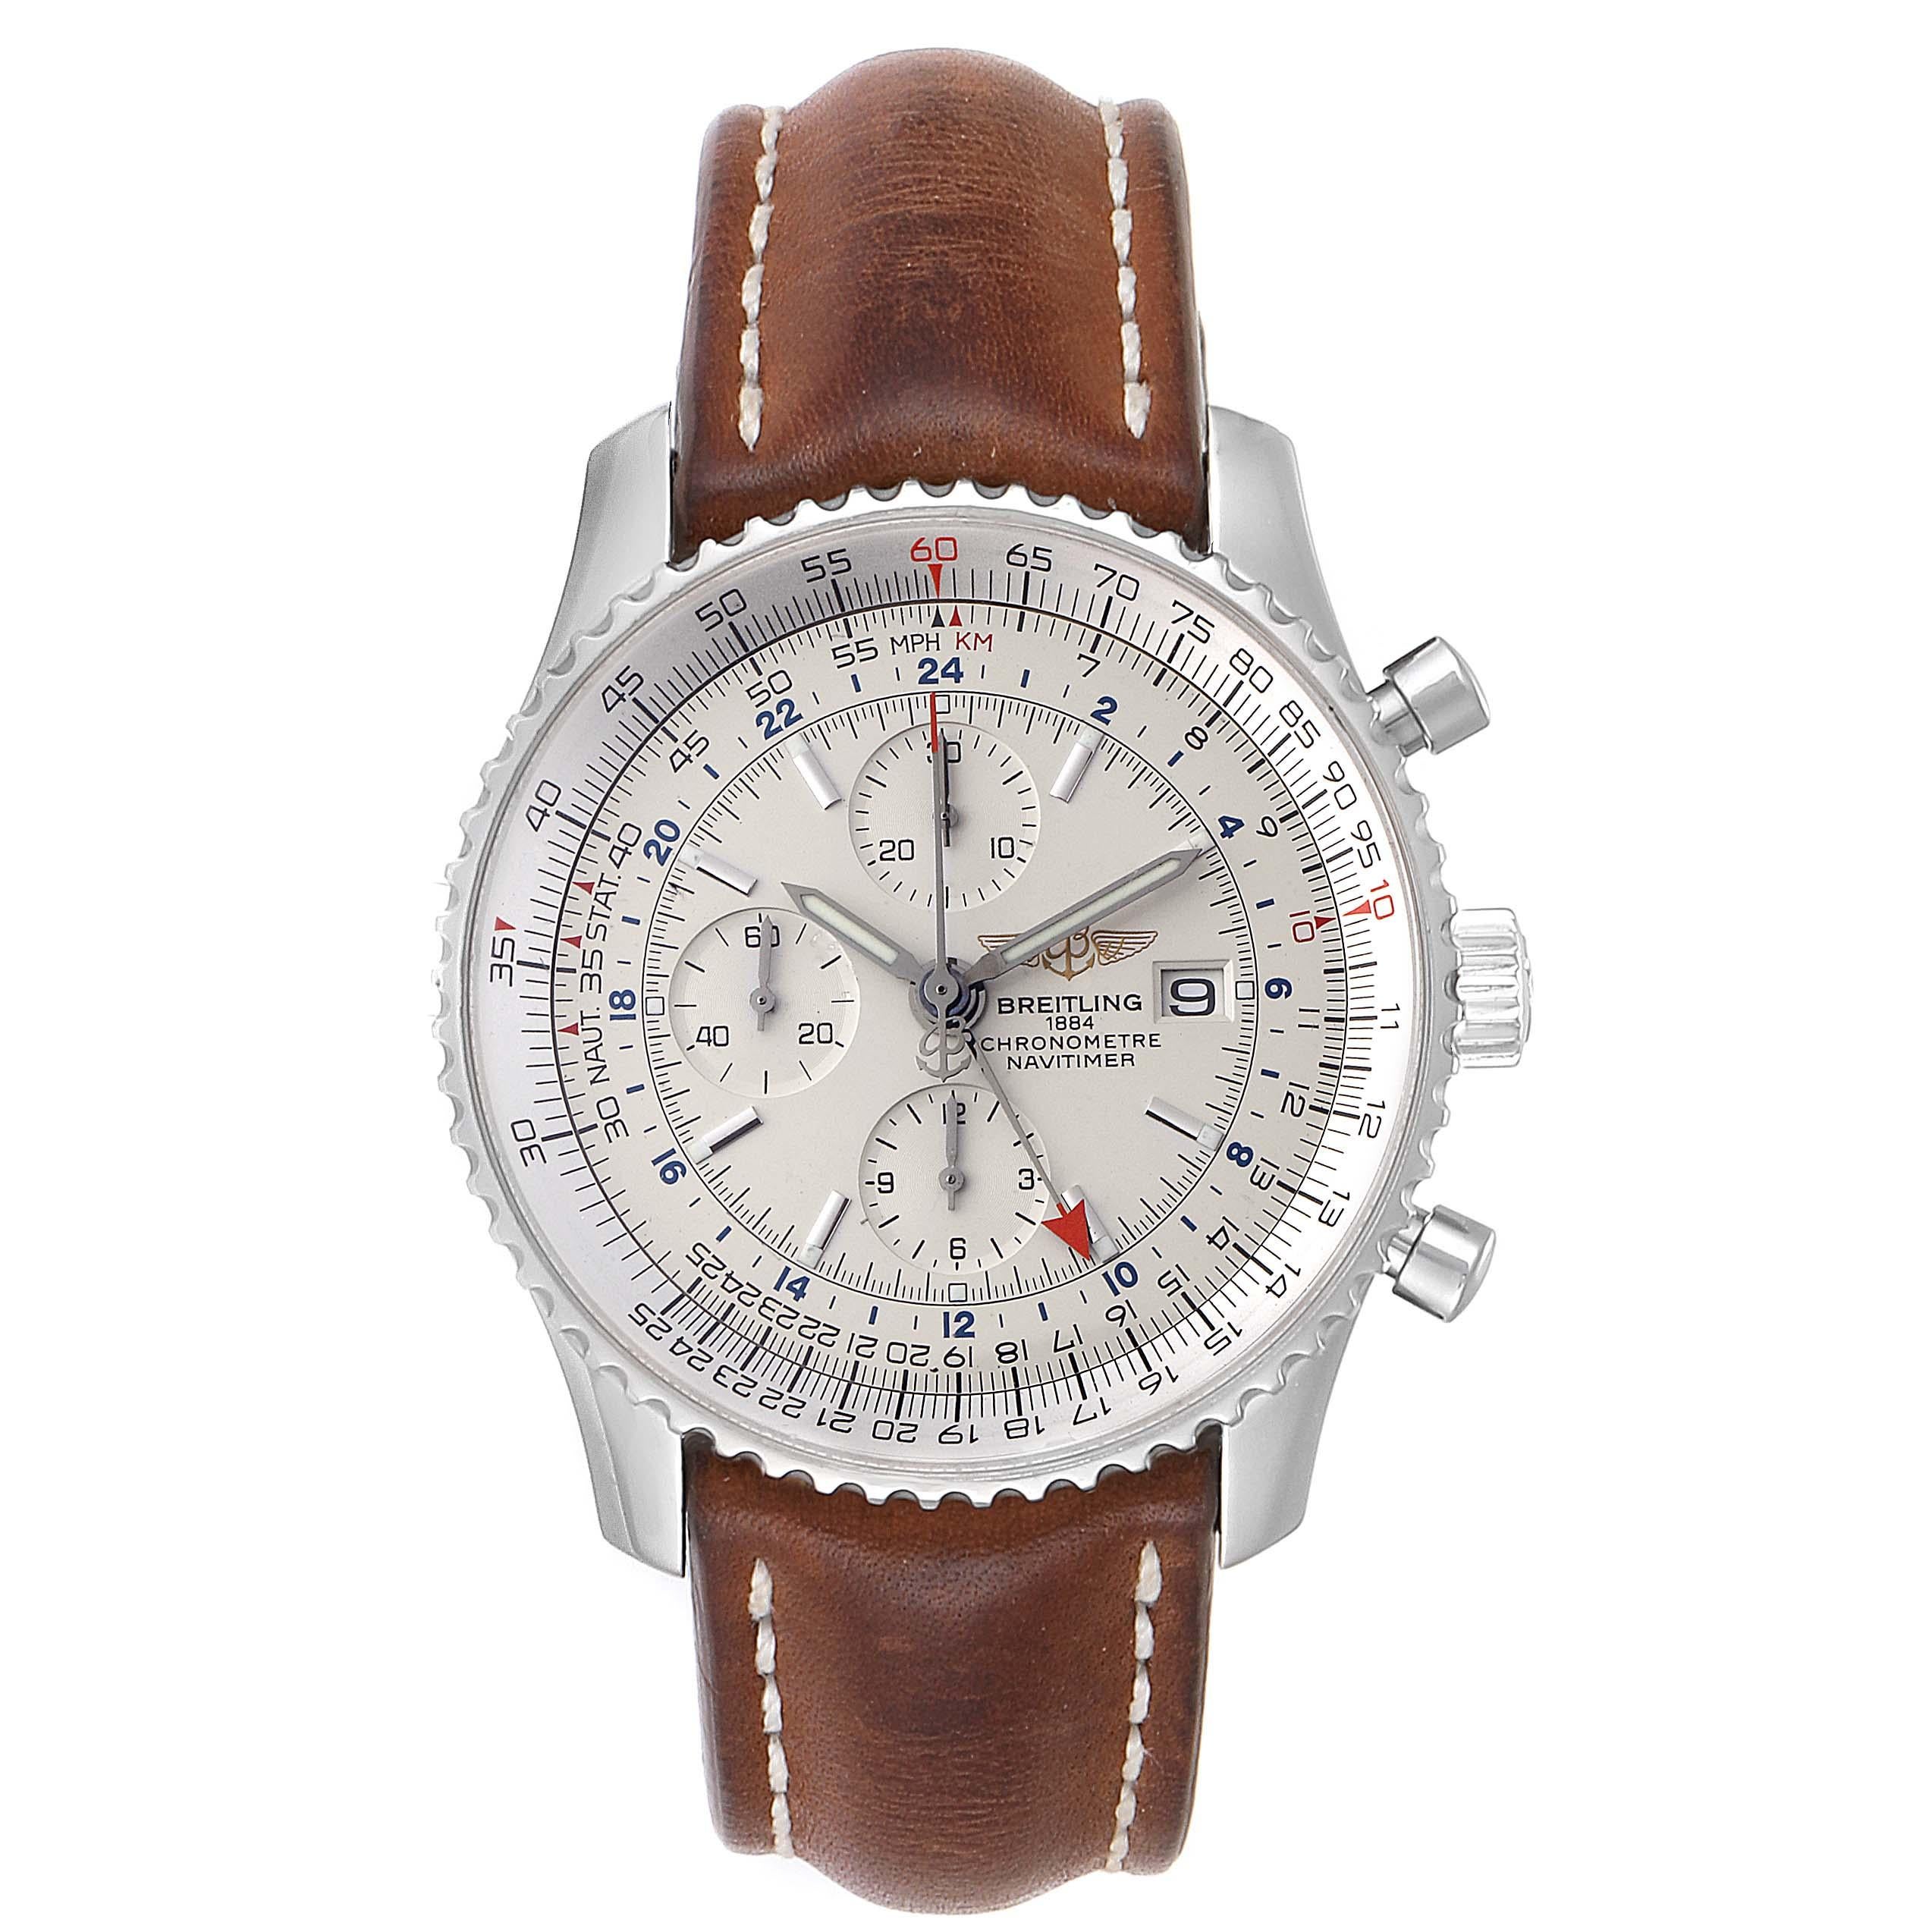 Breitling Navitimer World GMT White Dial Steel Mens Watch A24322. Self-winding automatic officially certified chronometer movement. Chronograph function. Stainless steel case 46 mm in diameter. Stainless steel screwed-down crown and pushers.